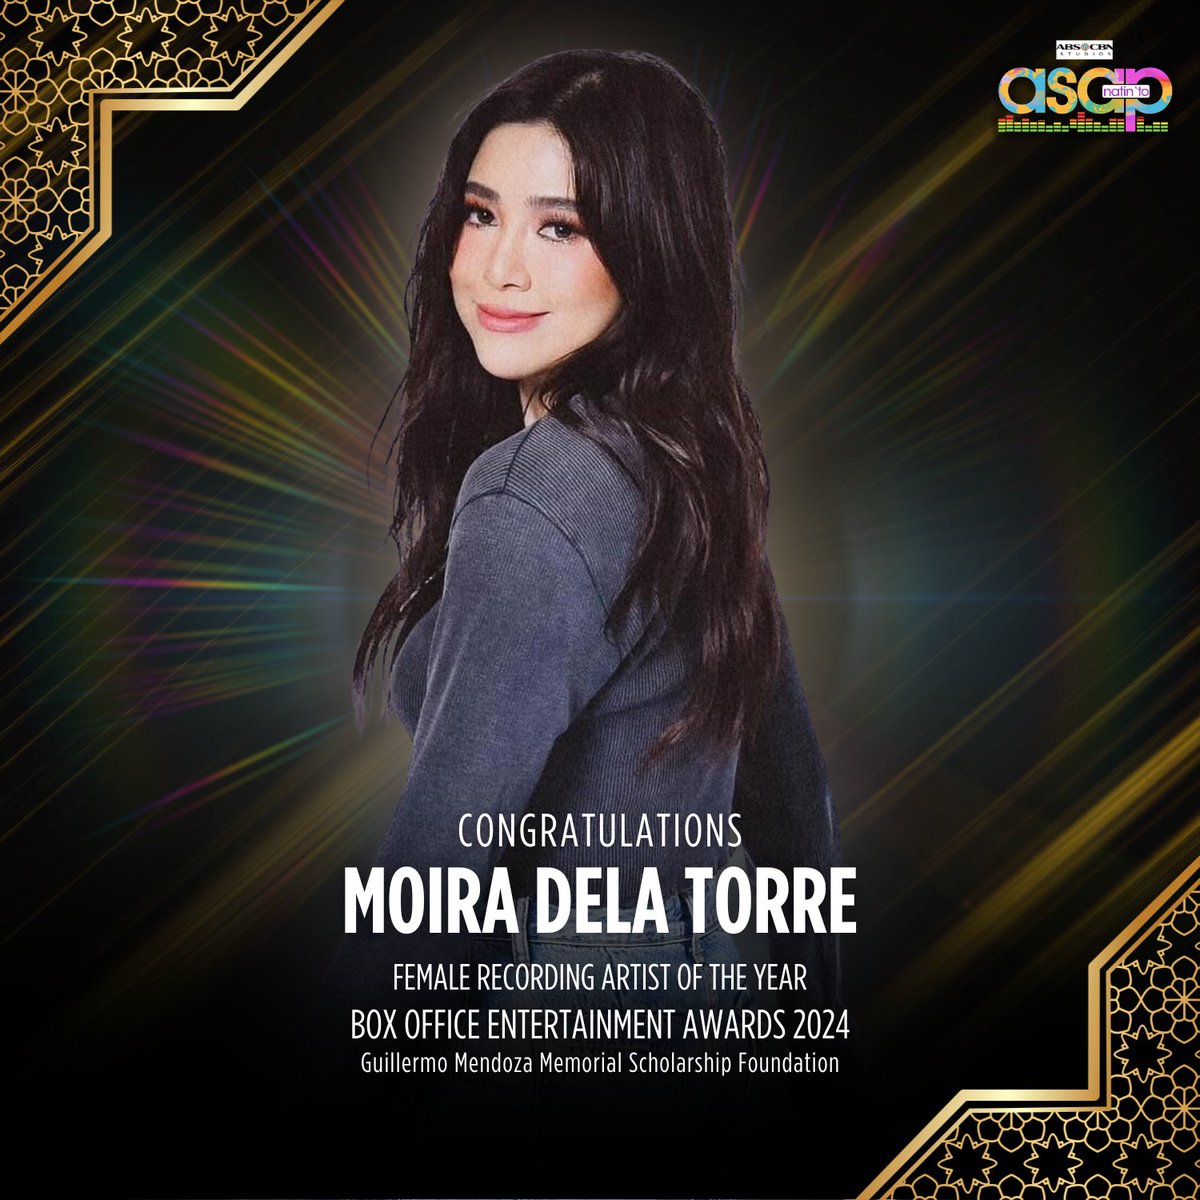 🎵 Congratulations to Moira dela Torre for being awarded as the Female Recording Artist of the Year at the Box Office Entertainment Awards by the Guillermo Mendoza Memorial Scholarship Foundation! We are proud of you!